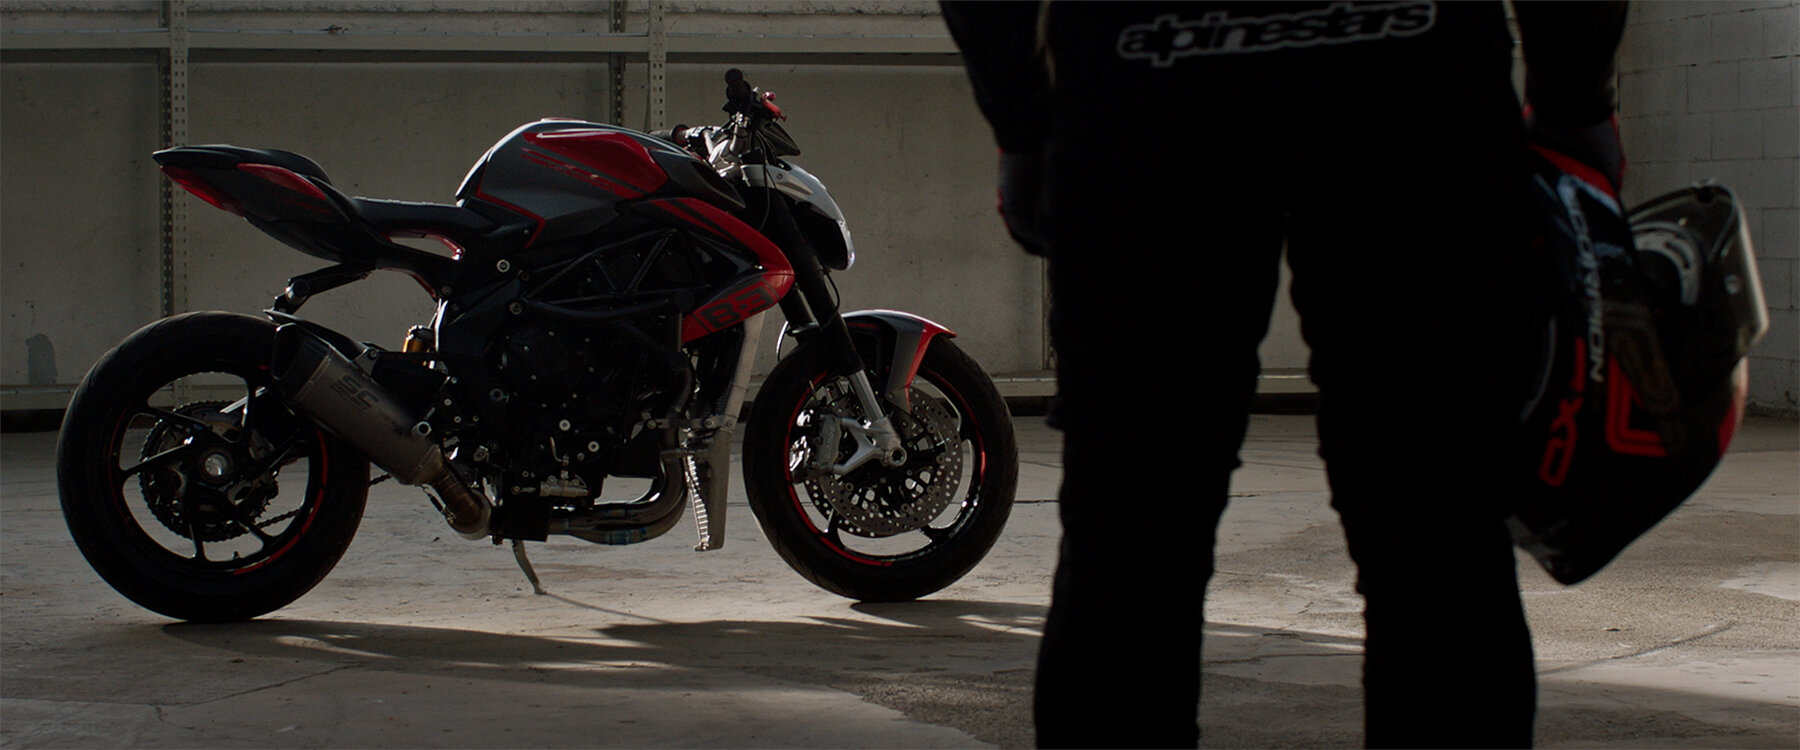 watch 'you see a bike' documentary by iconic motorcycle maker MV agusta